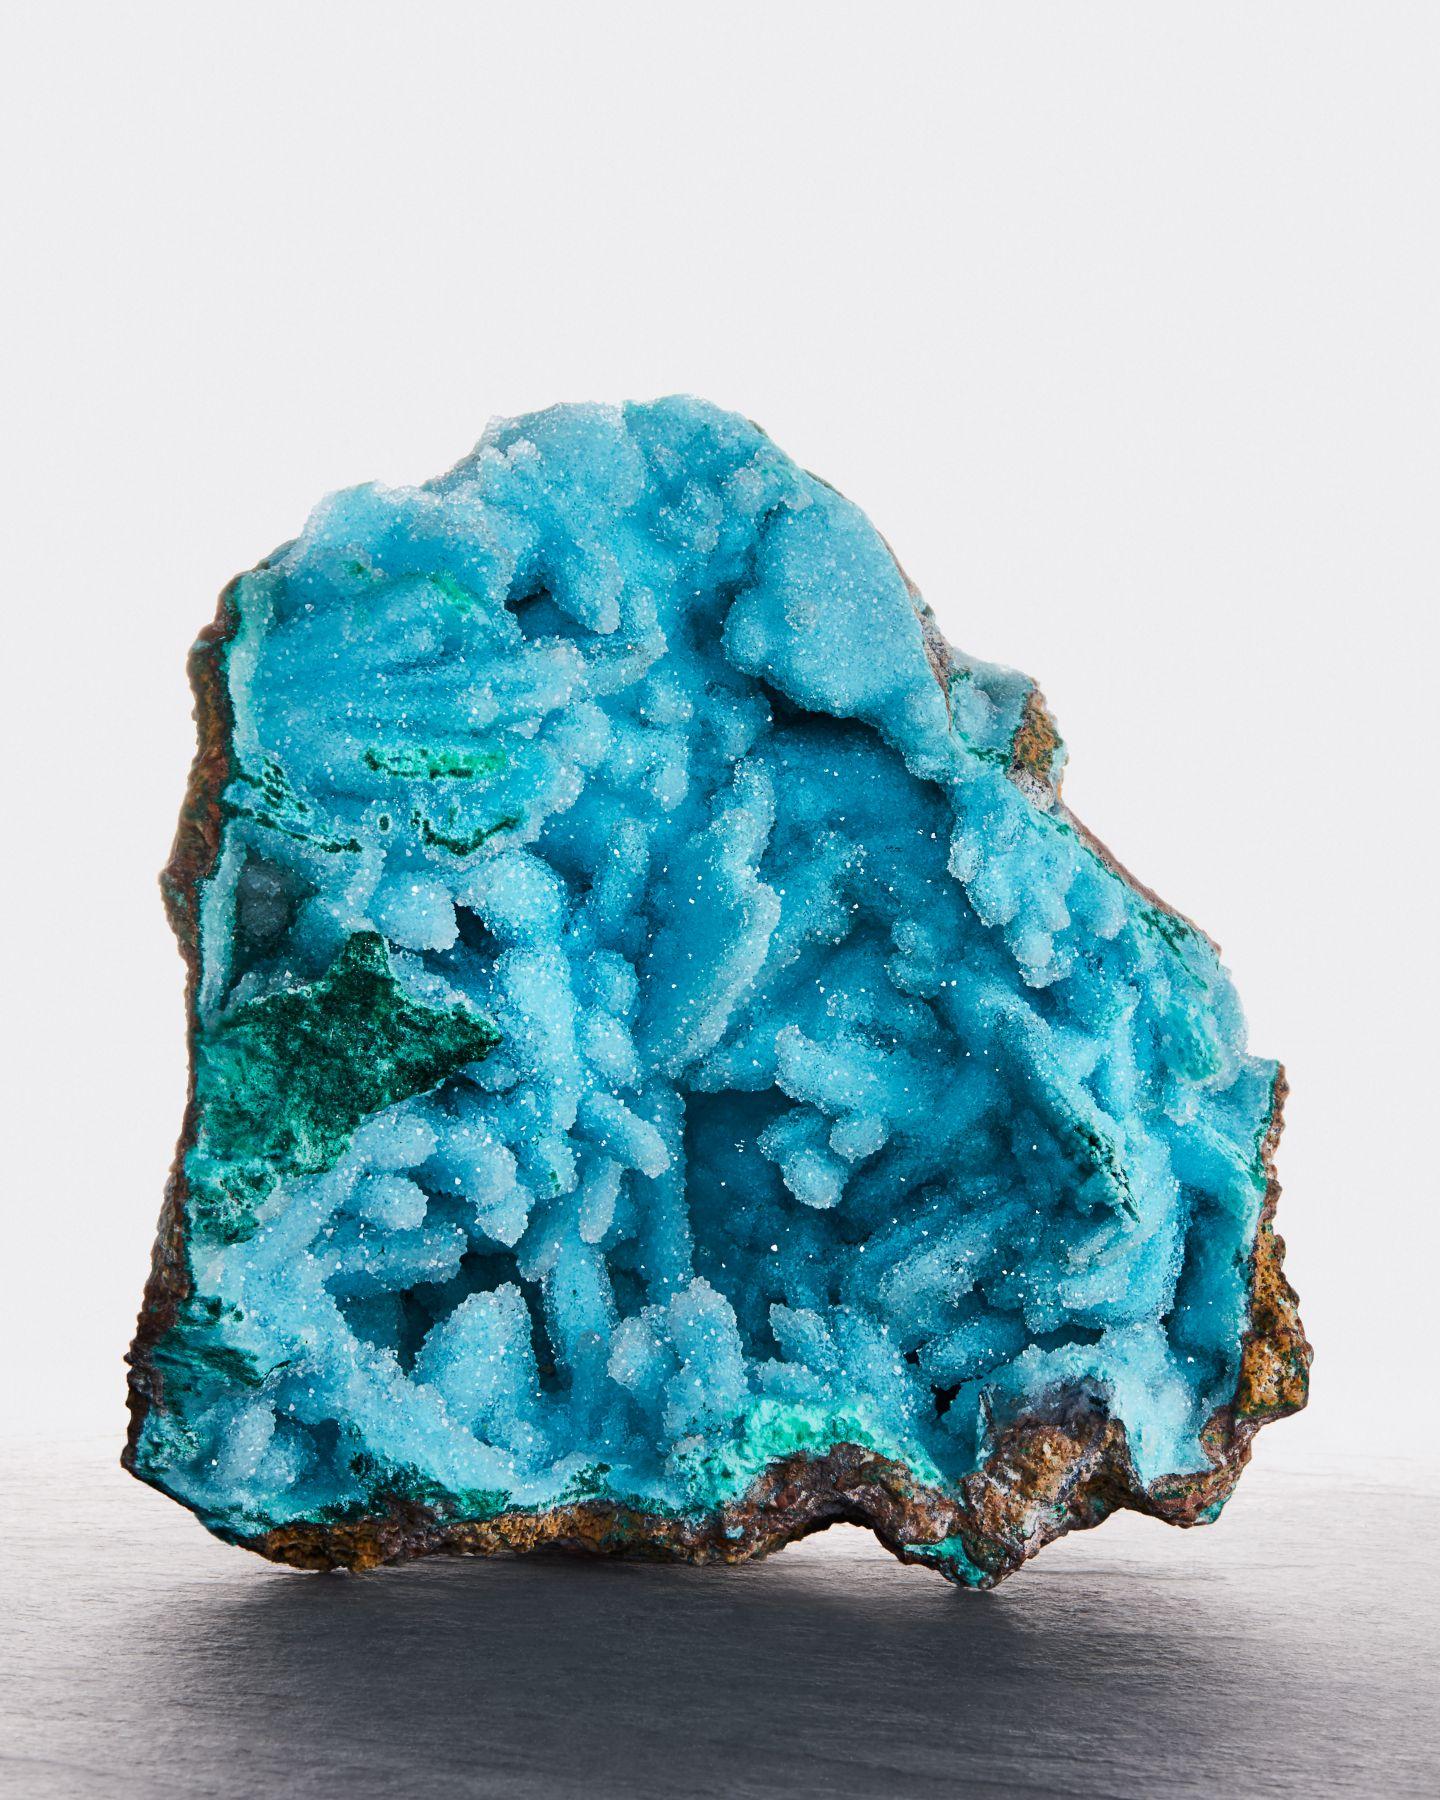 Chrysocolla after Barite with malachite coated with Drusy quartz
Lupoto Mine, Dem. Rep. of the Congo
This specimen is from a recent discovery. This piece began life as a barite and at some point in its paragenesis, the chemistry in the pocket